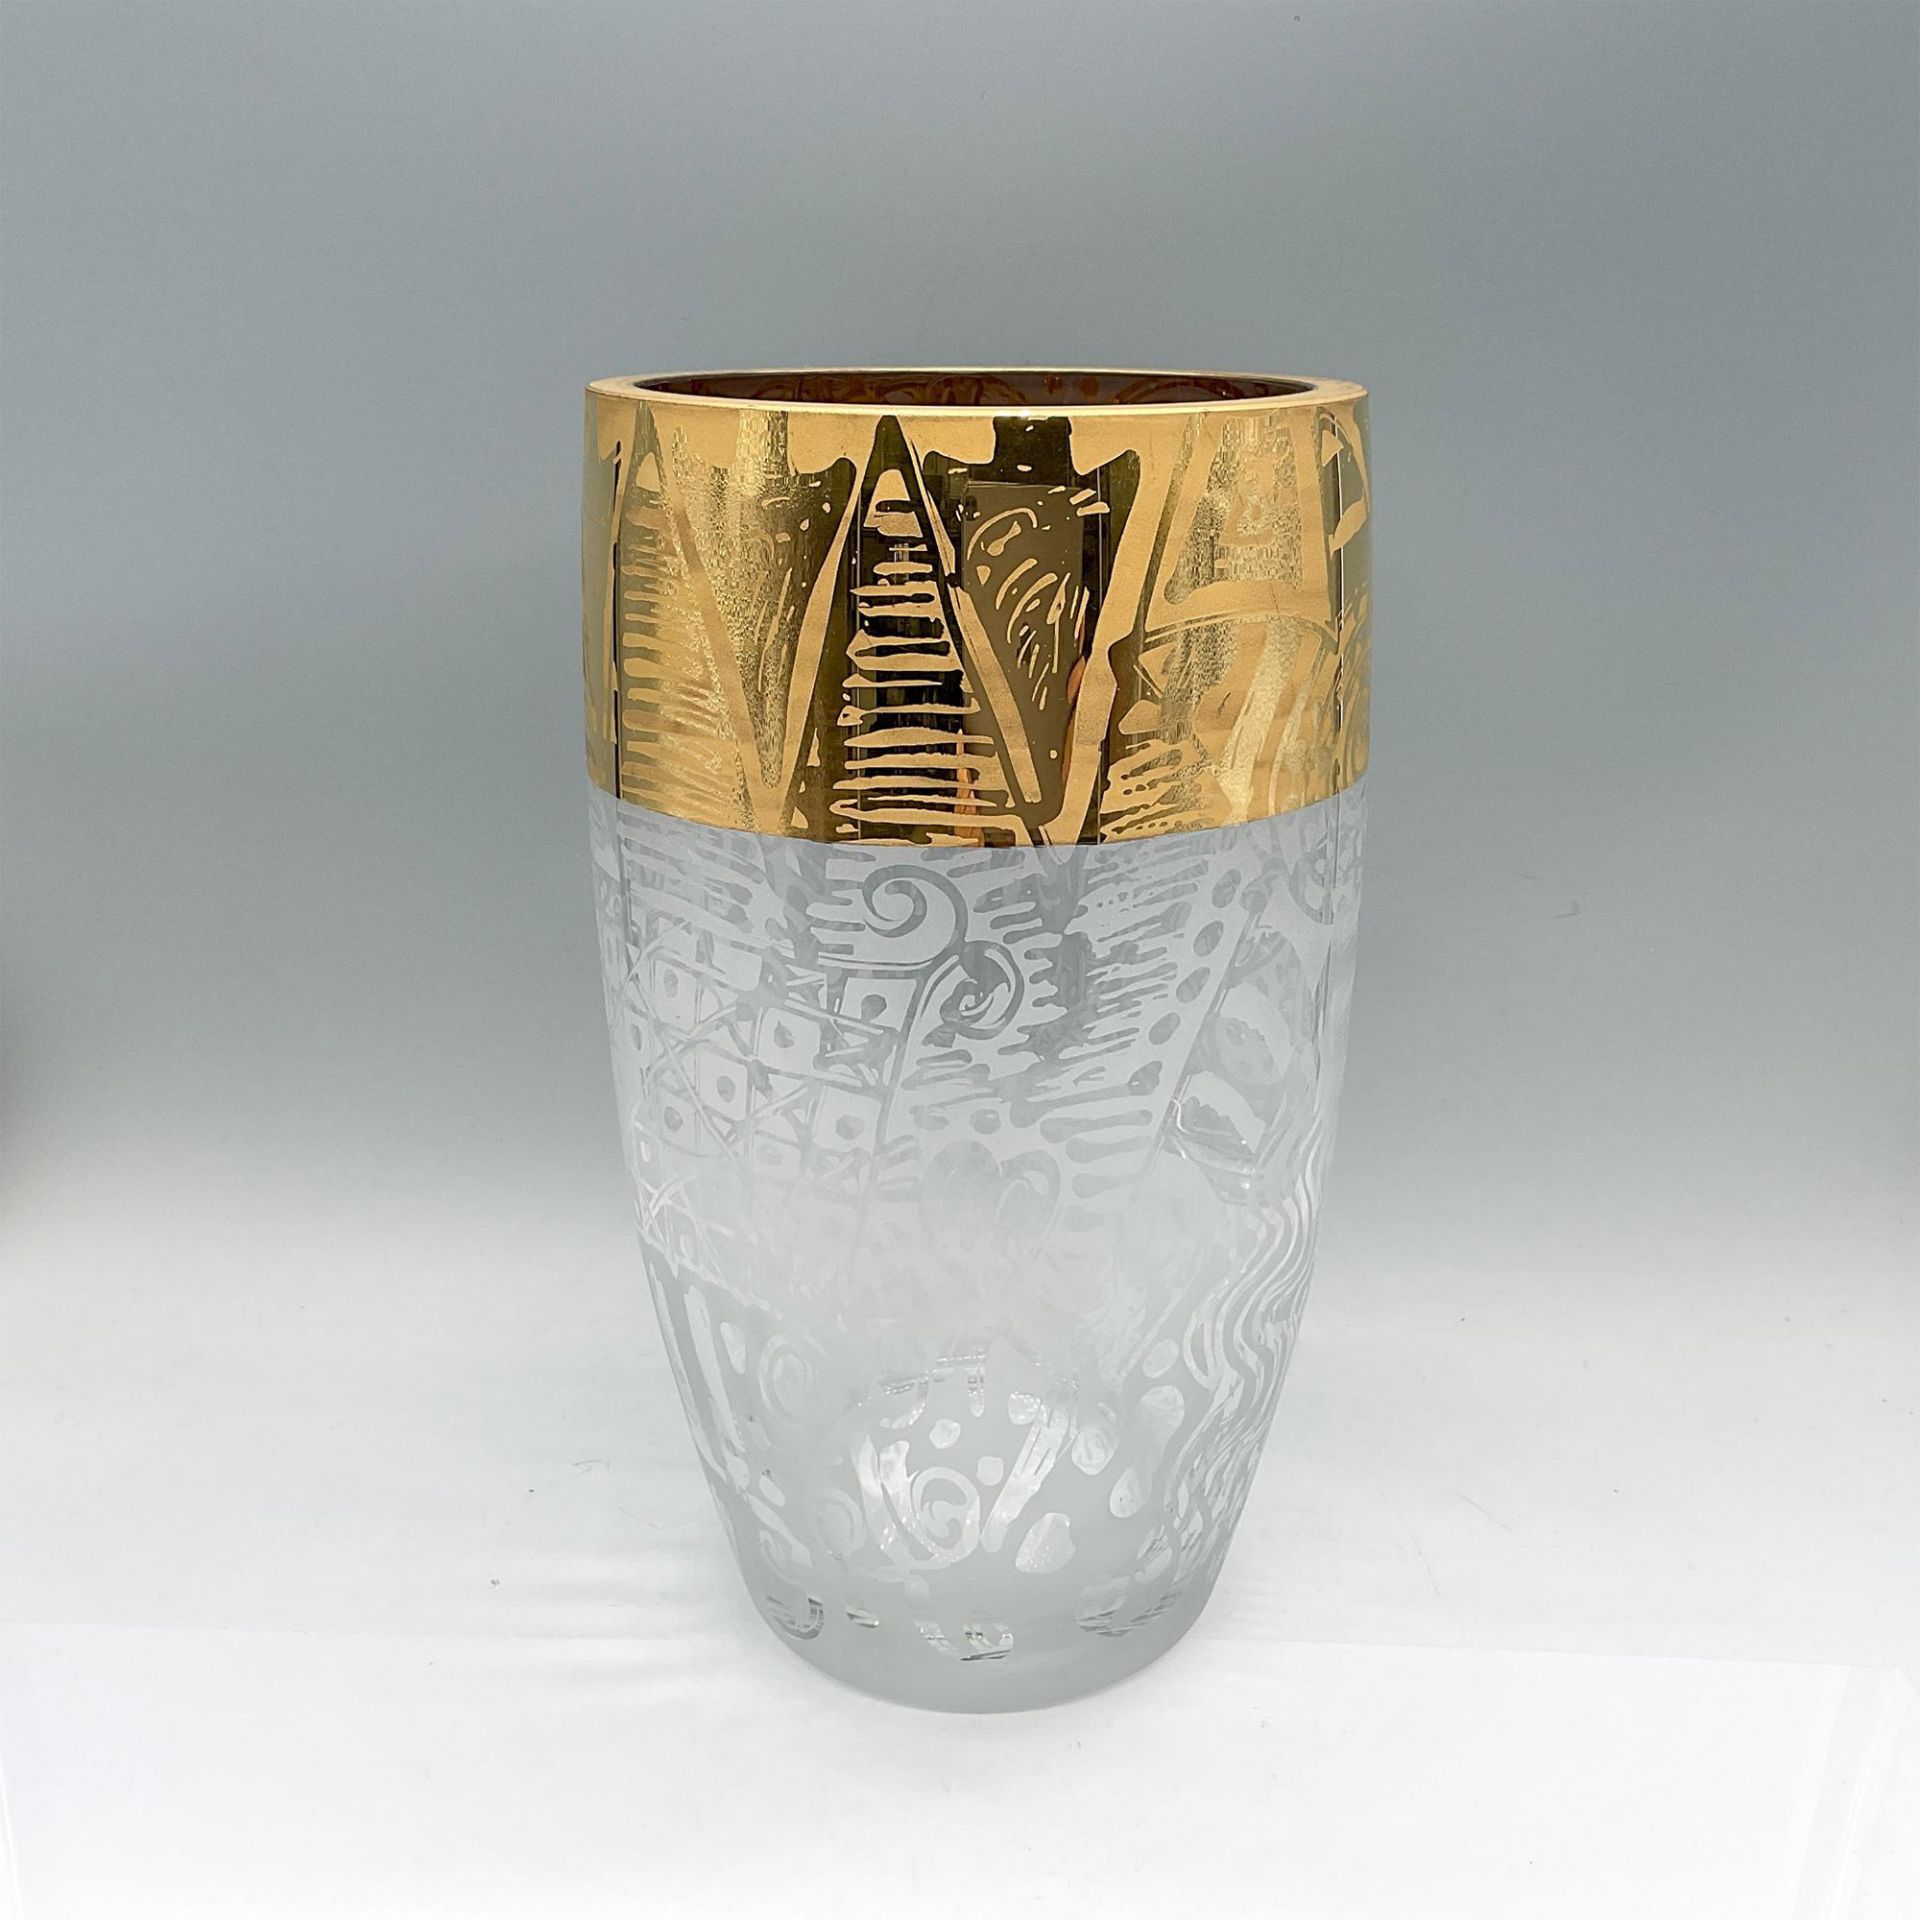 Etched and Gilded Art Glass Vase - Image 3 of 3